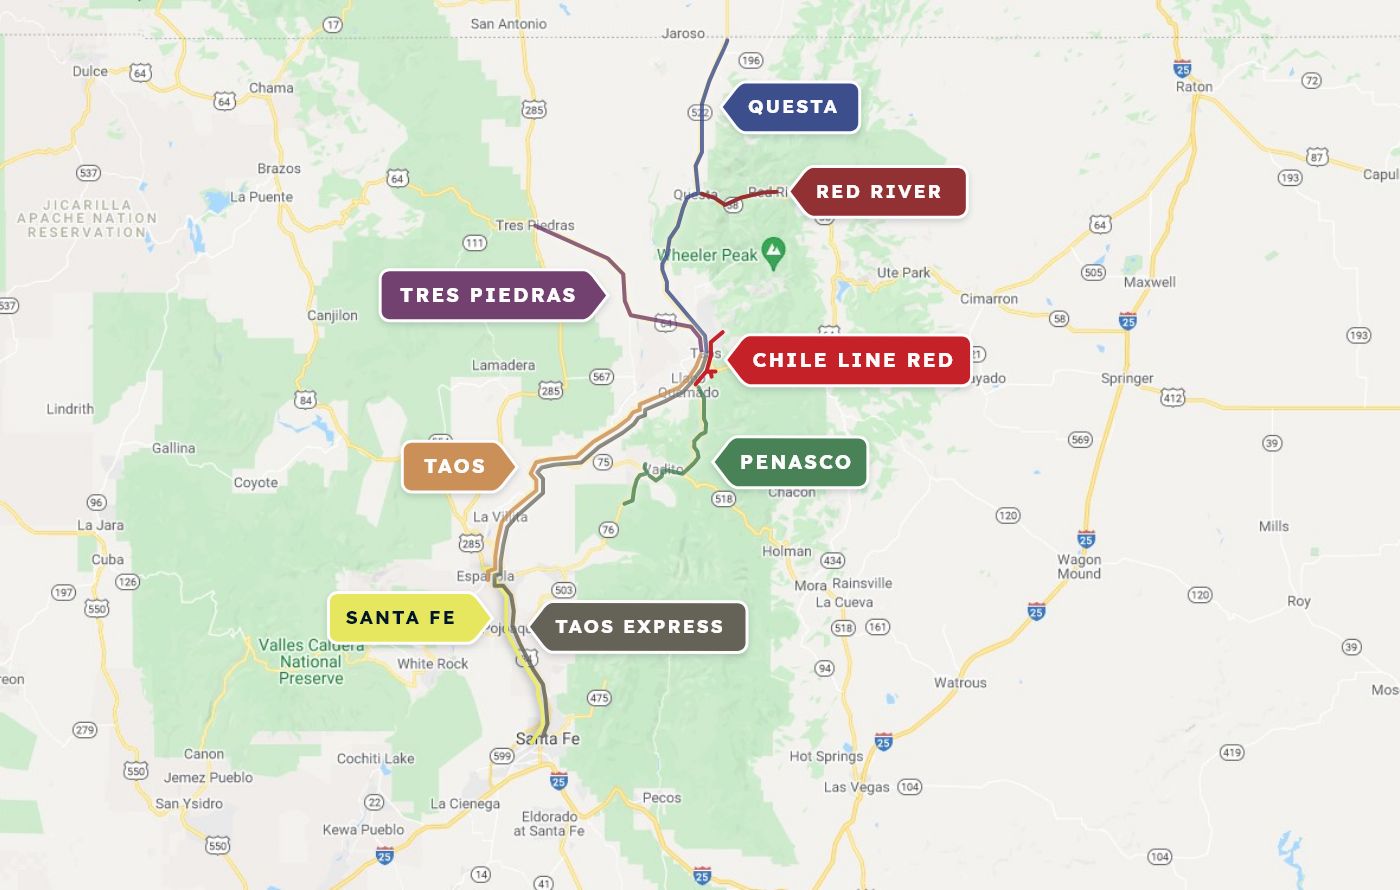 Map of Taos area routes